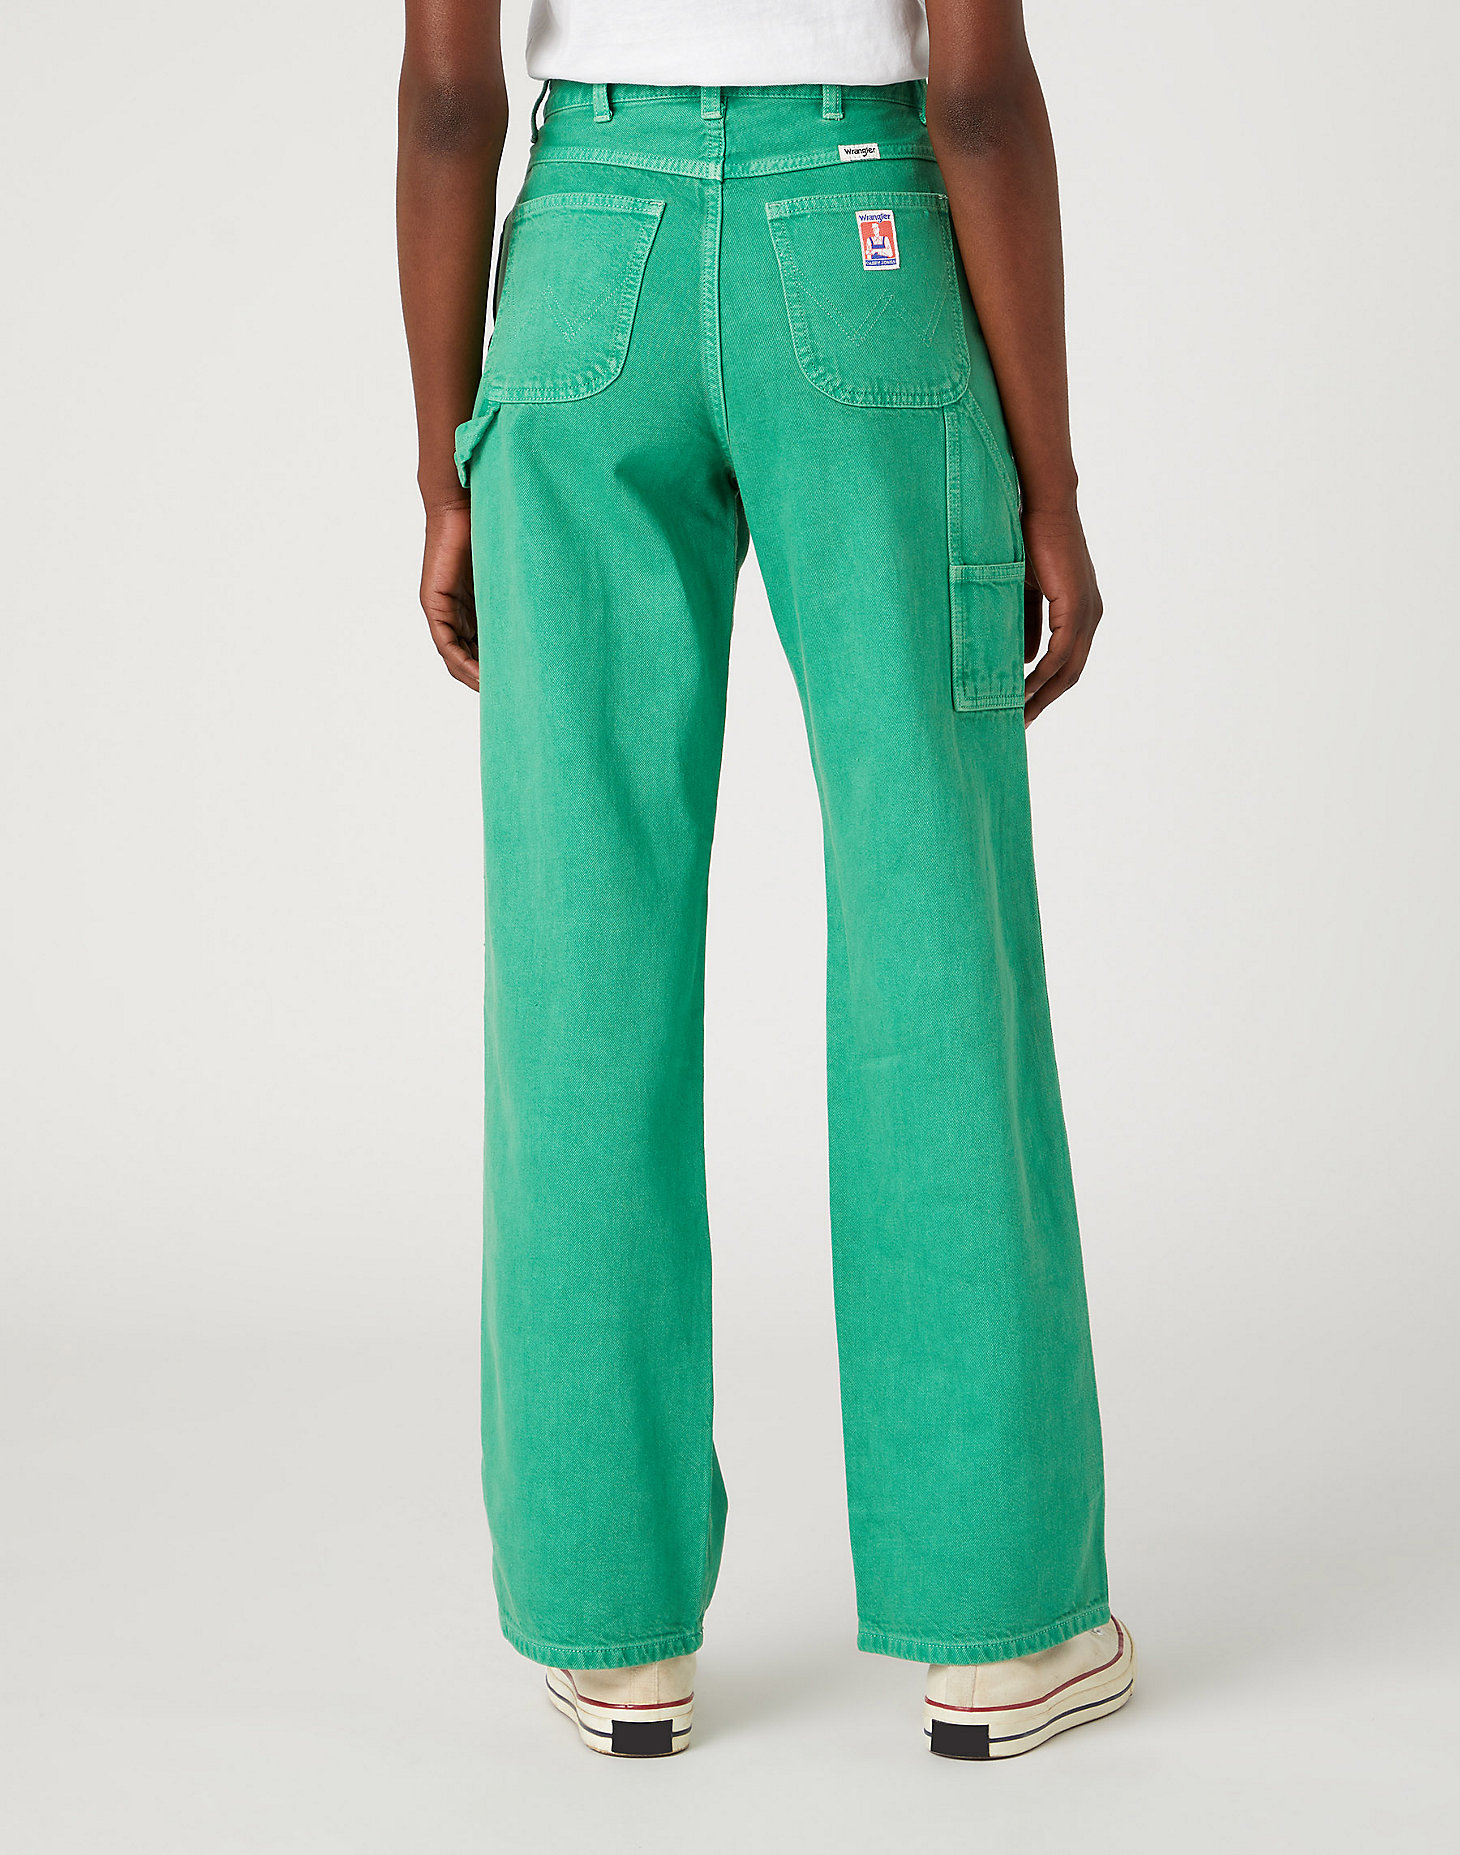 Mom Relaxed Carpenter Jeans in Bright Green alternative view 2